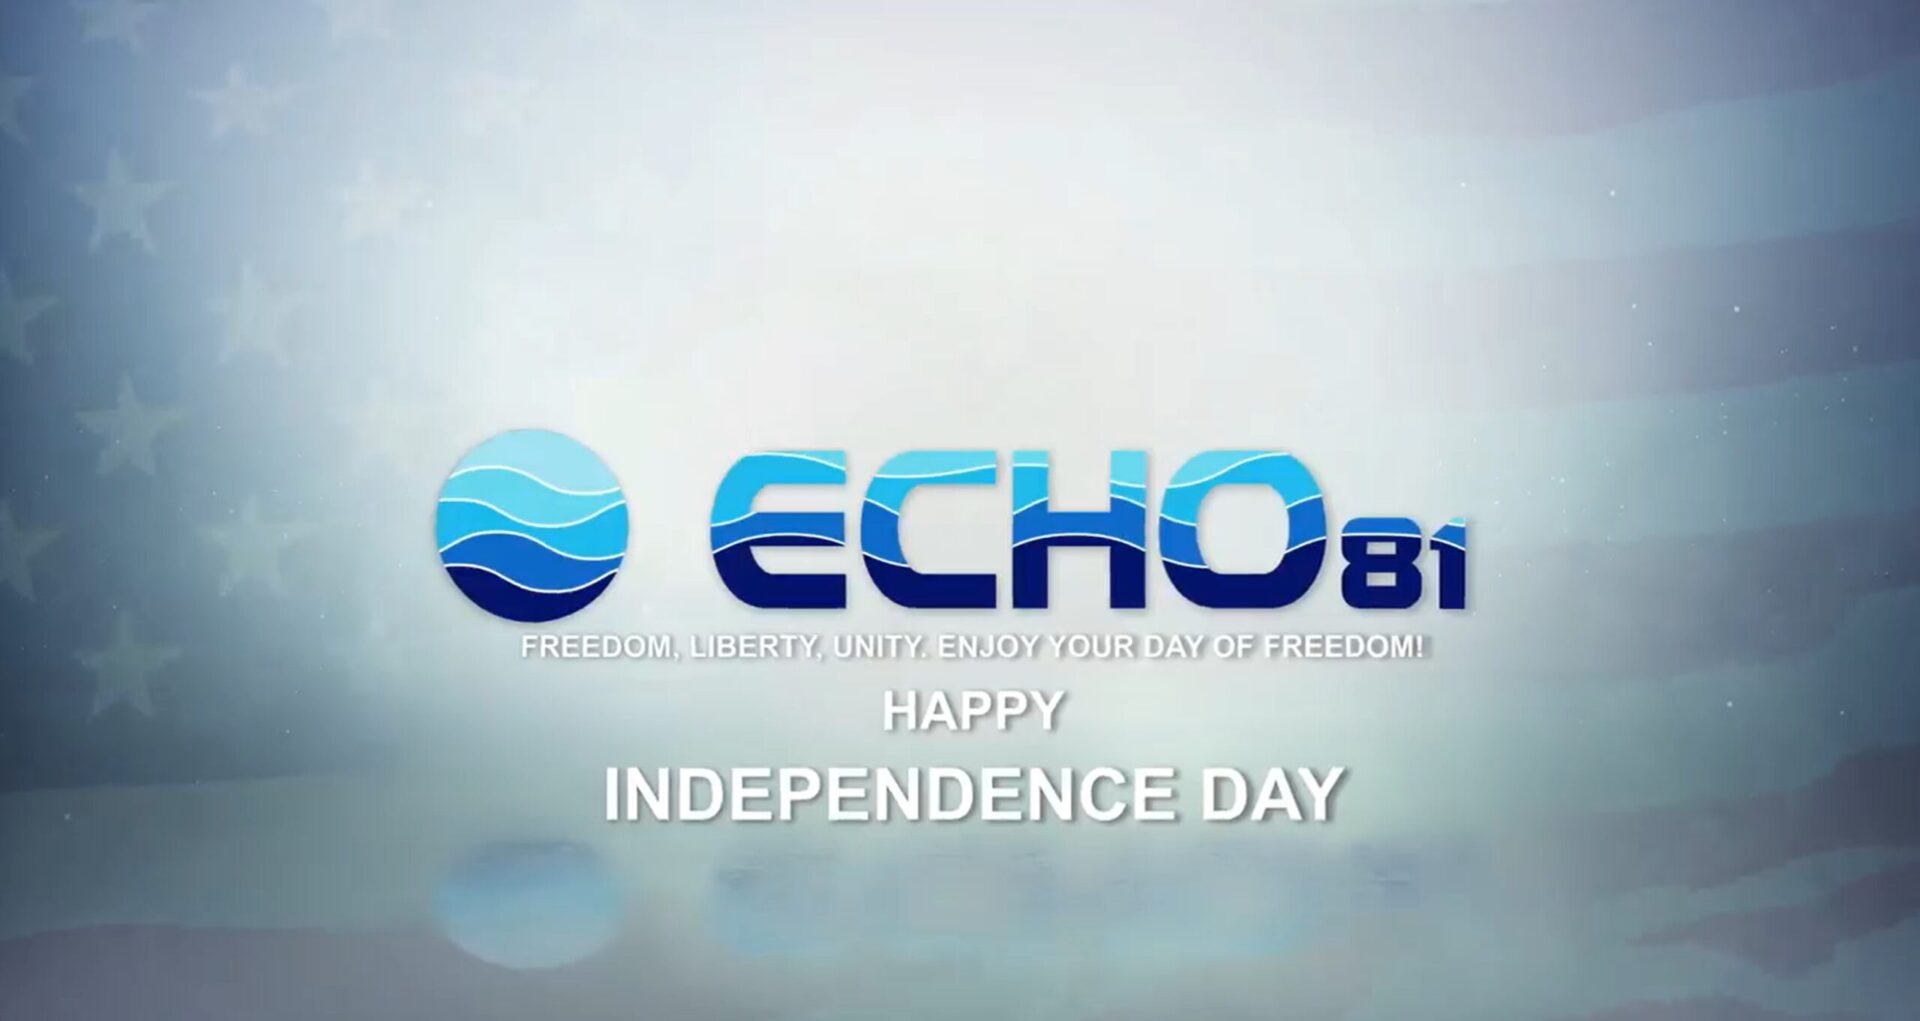 Happy 4th of July ECHO81 is Premier Supplier of Underwater Survey Technologies Rental Sales Training Offshore Hydrography Geophysics.